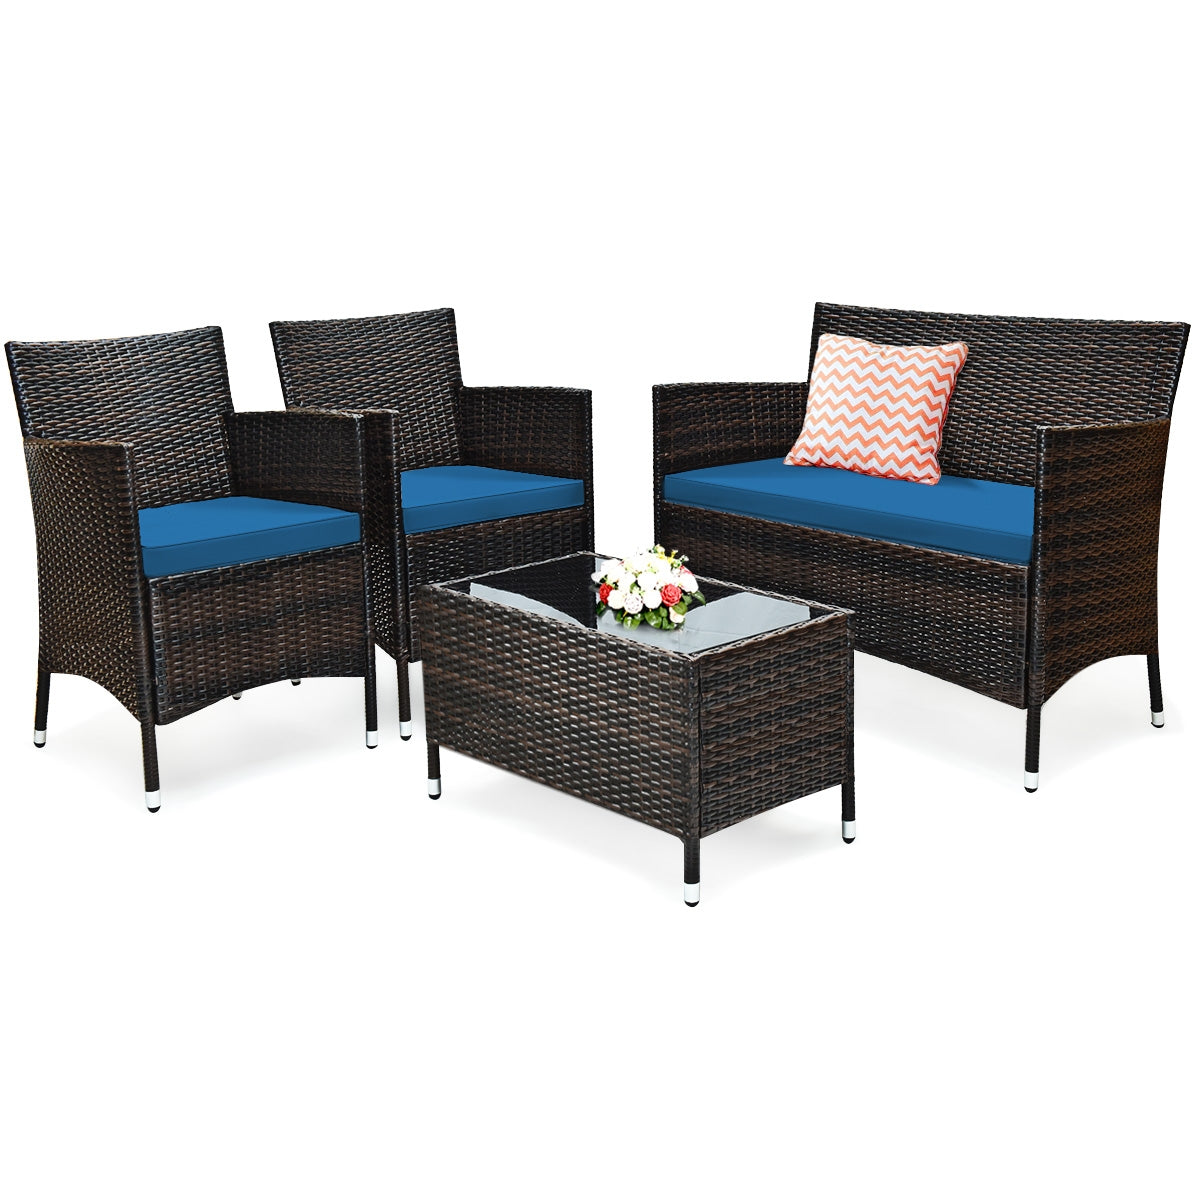 4 Pieces Comfortable Outdoor Rattan Sofa Set with Glass Coffee Table-Peacock Blue